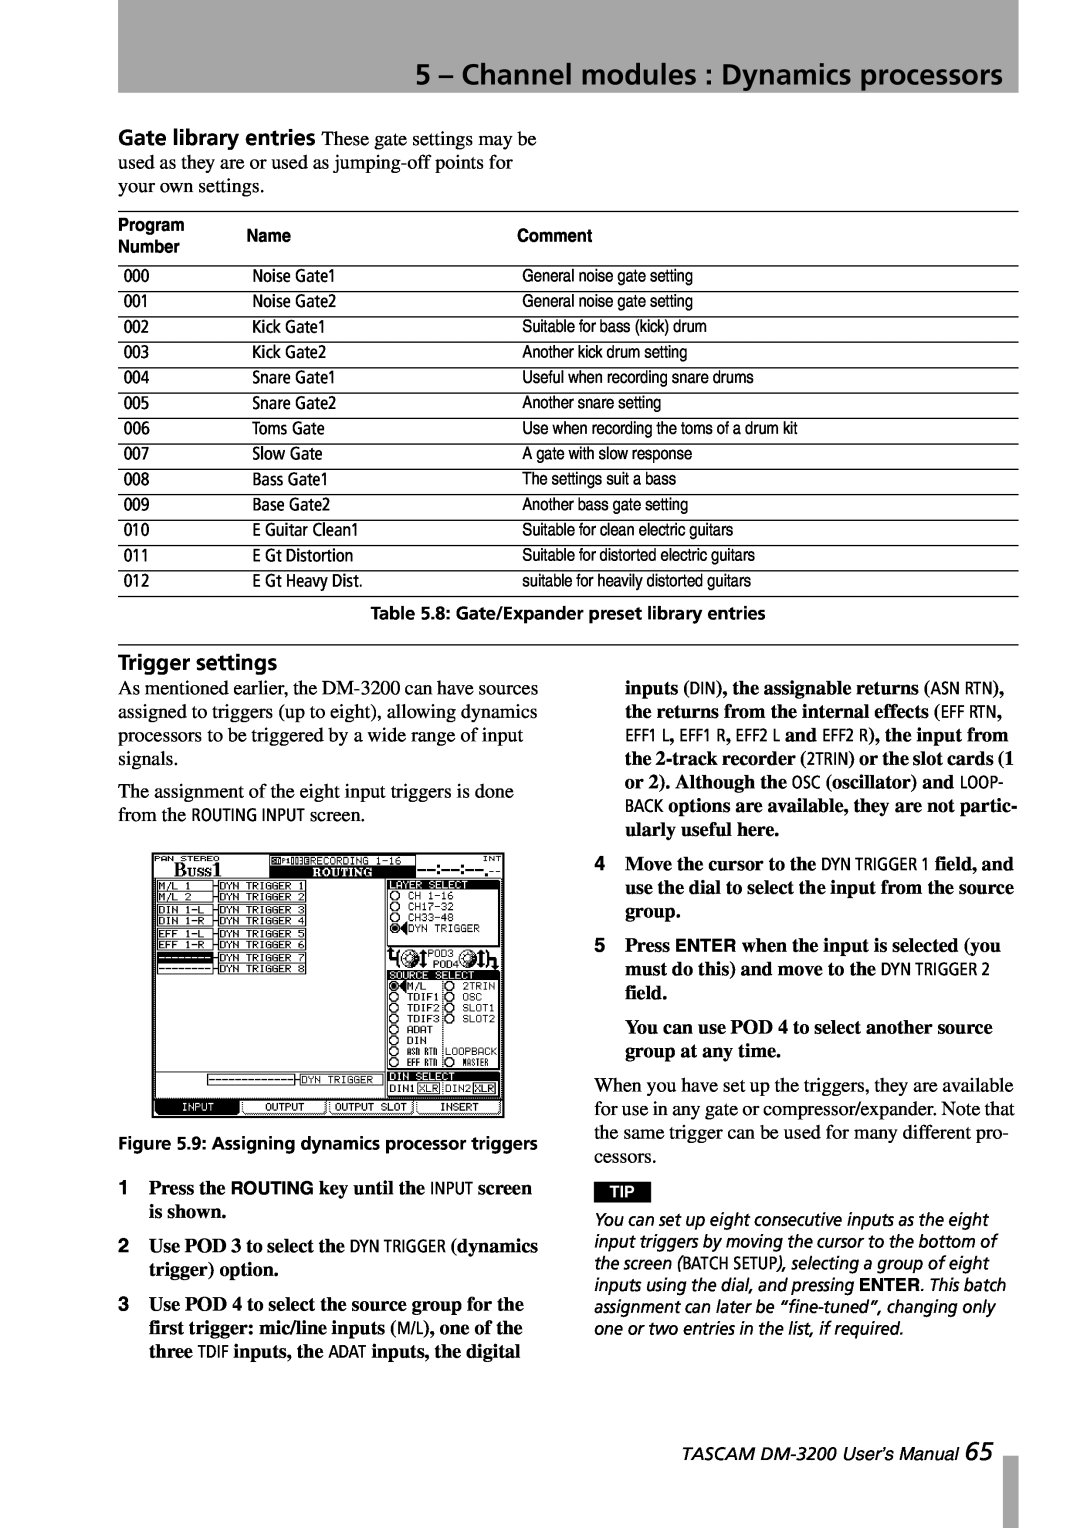 Tascam DM-3200 owner manual Trigger settings, 5 – Channel modules : Dynamics processors, Program, Name, Comment, Number 